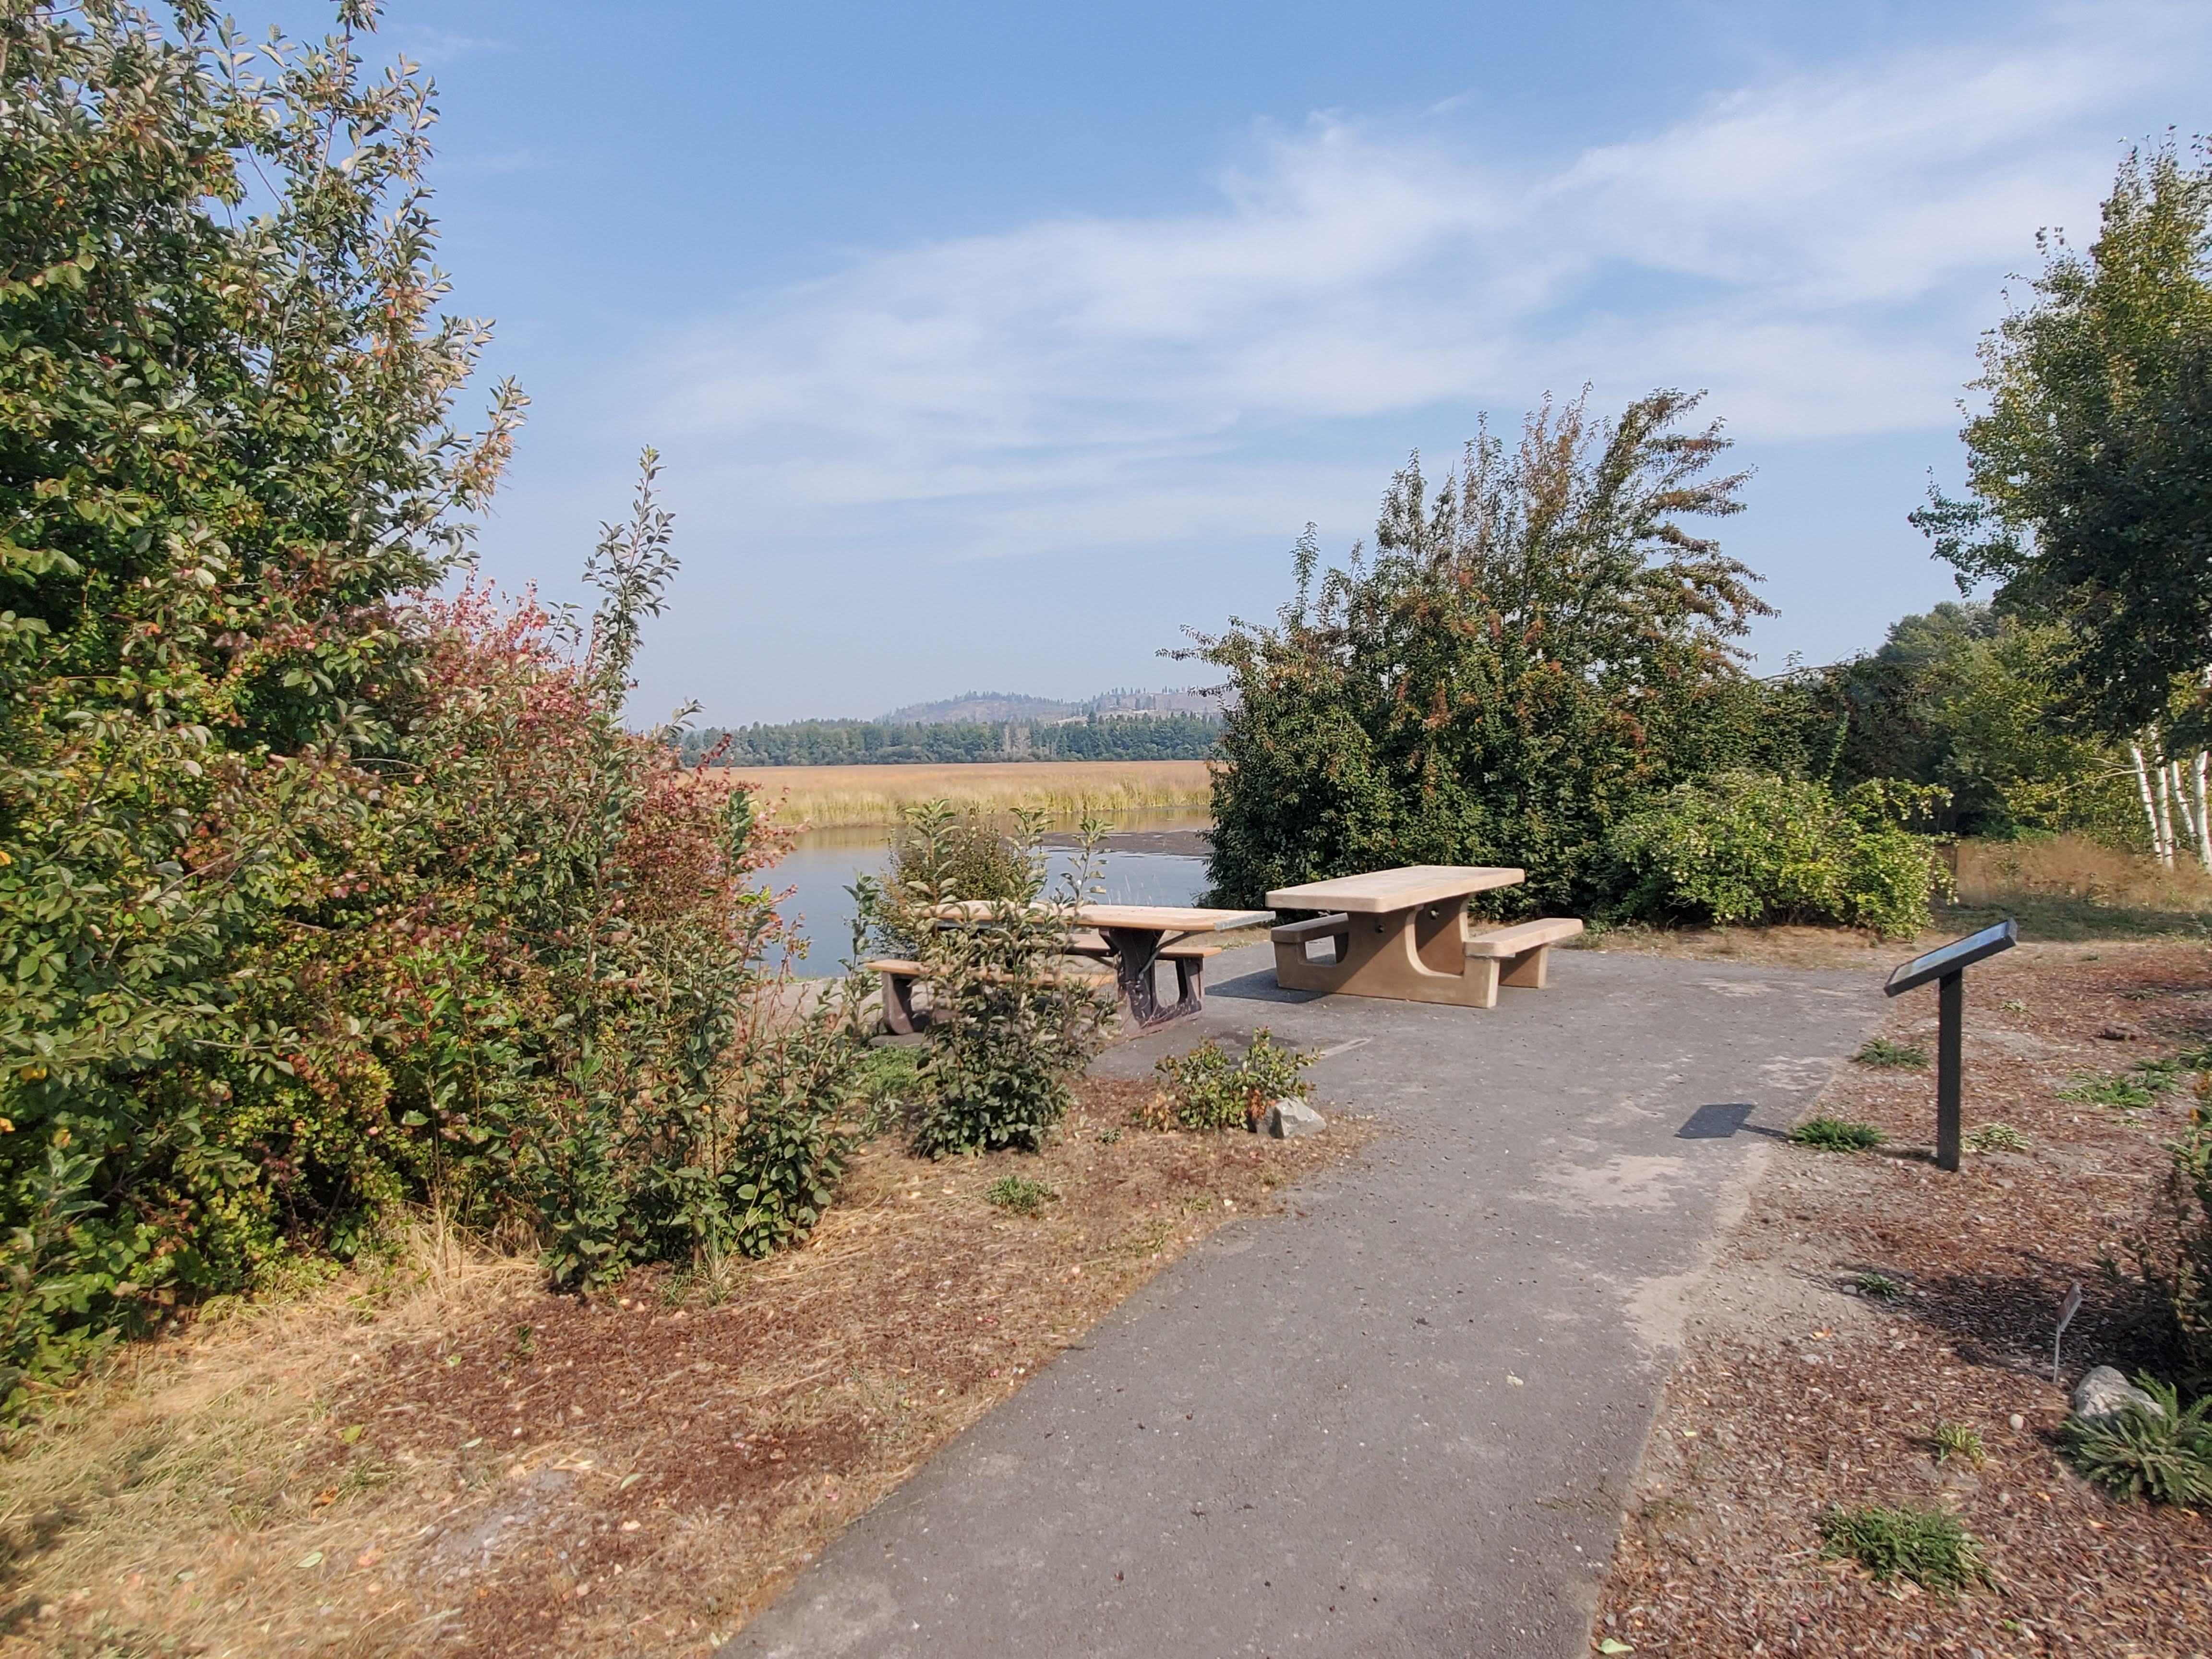 Accessible paved trail and picnic tables